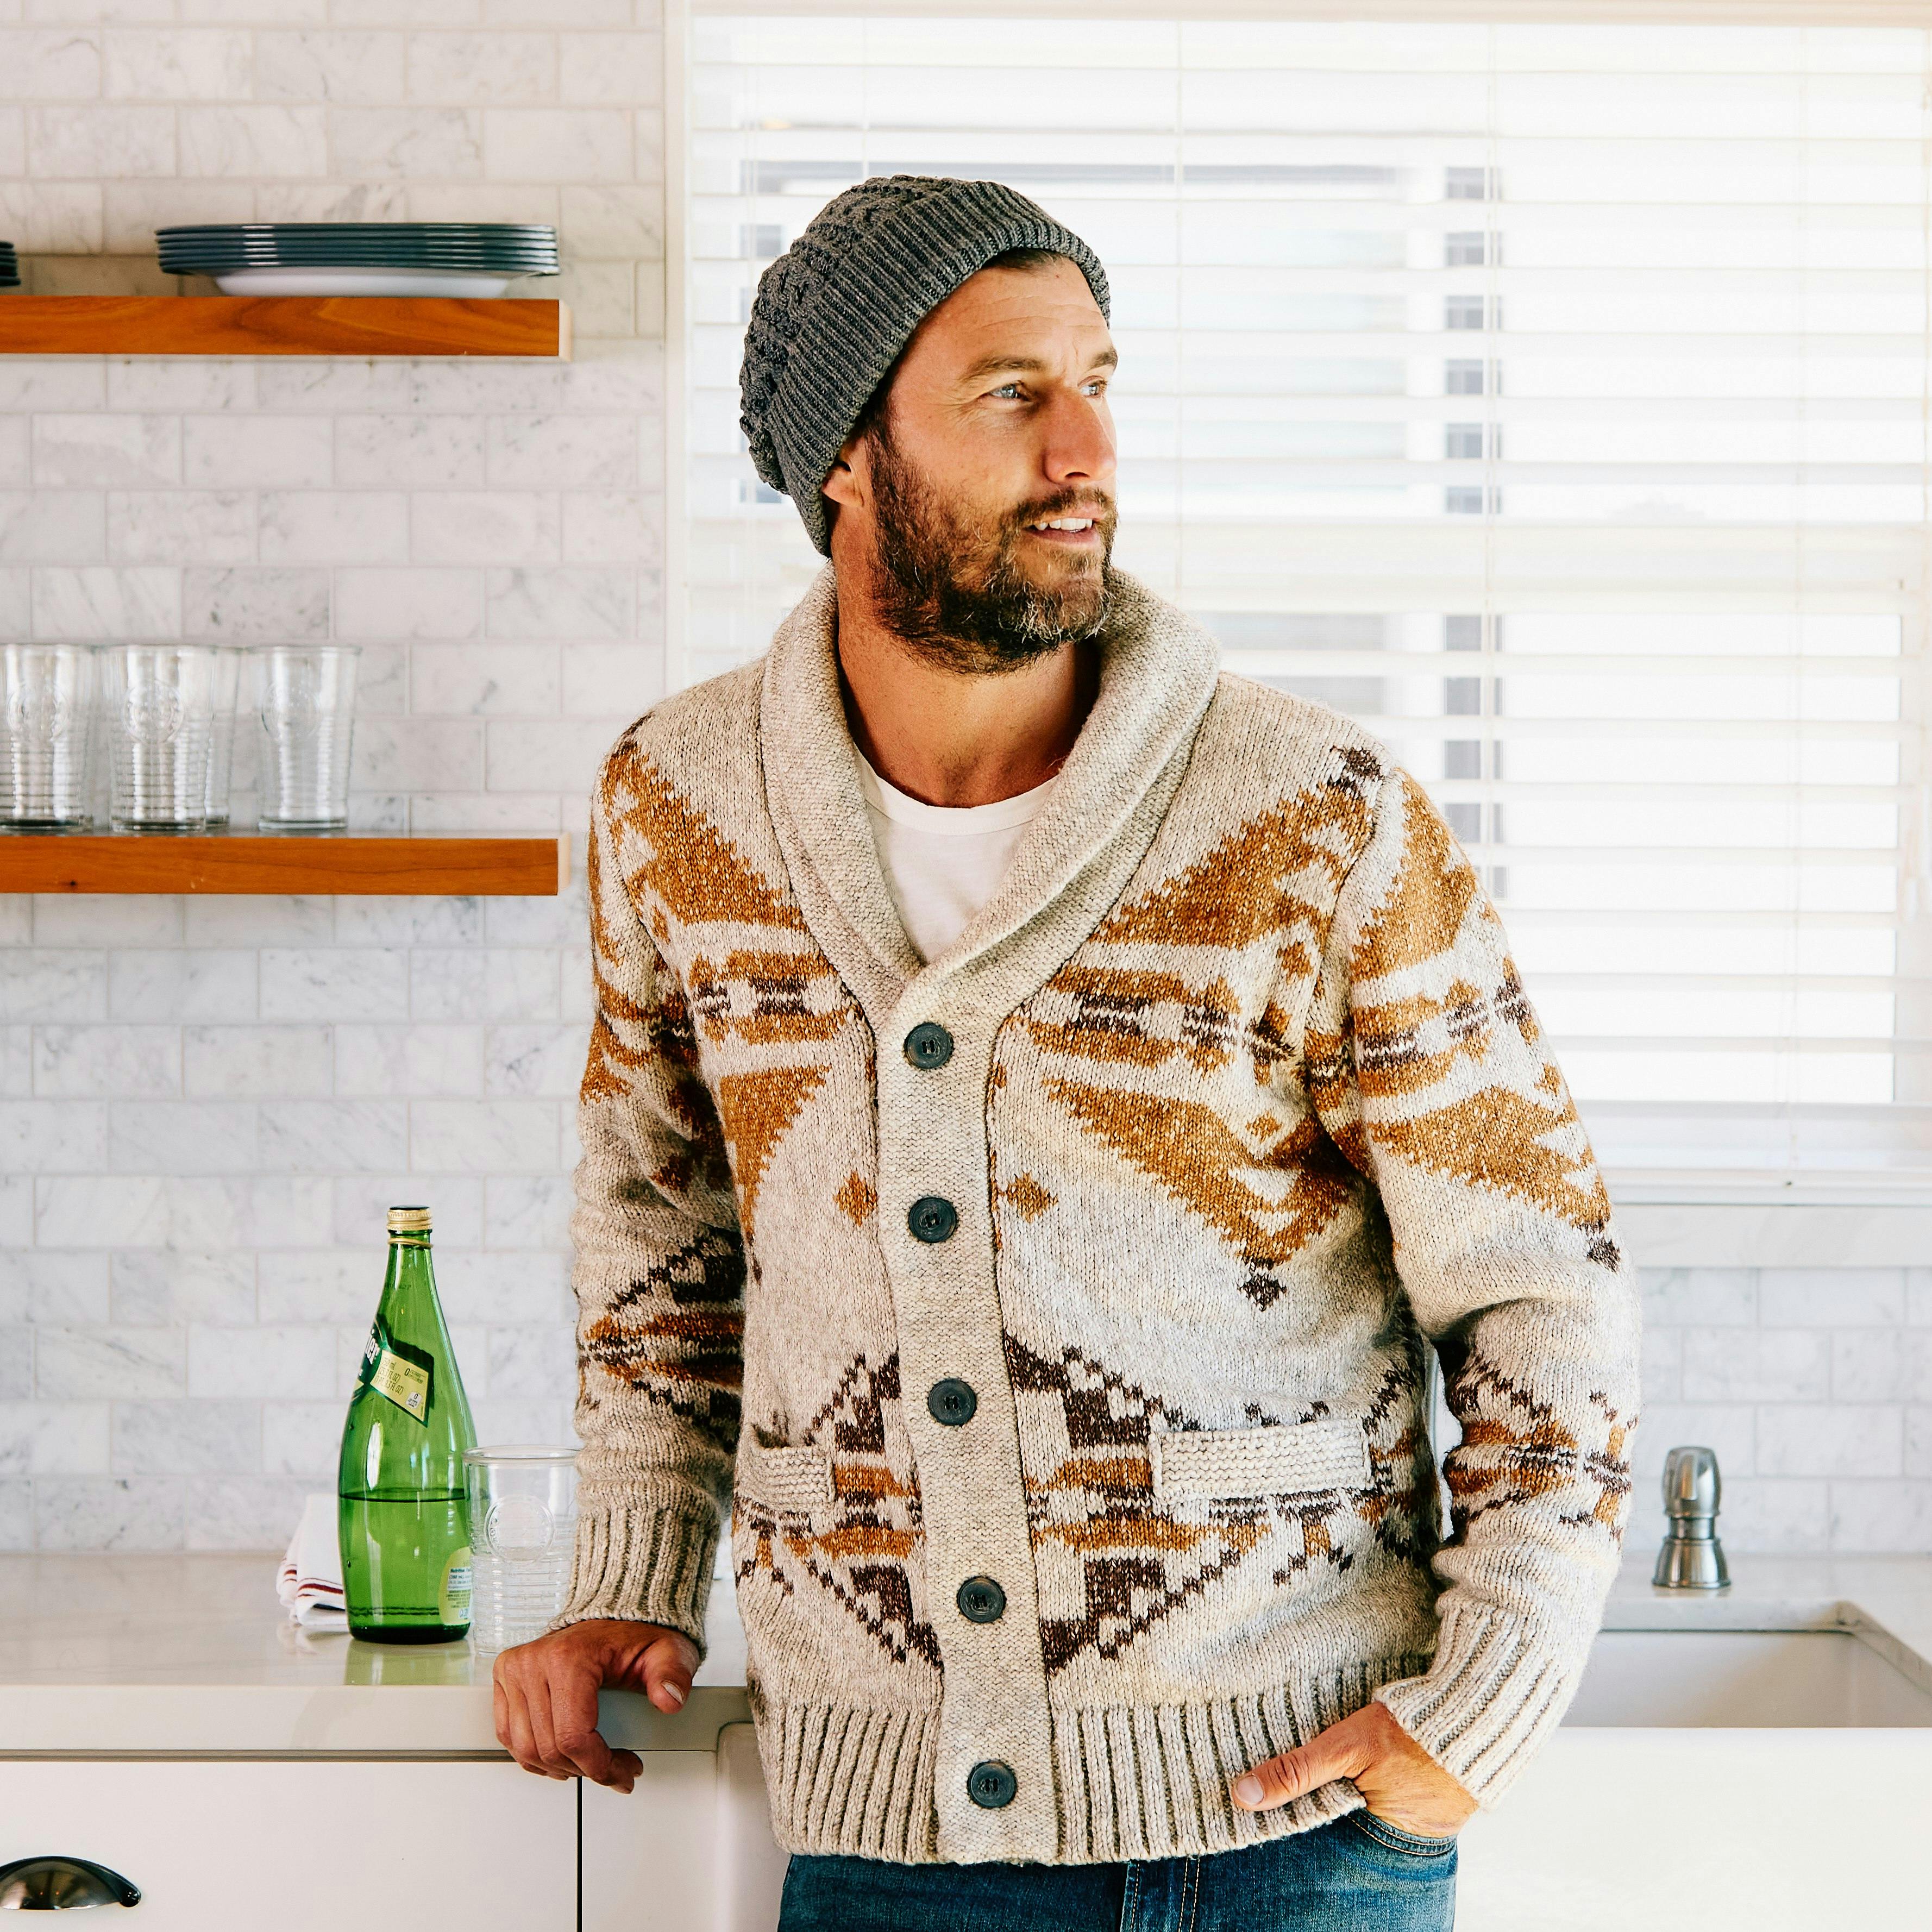 Men's Knit sweater with jeans motif